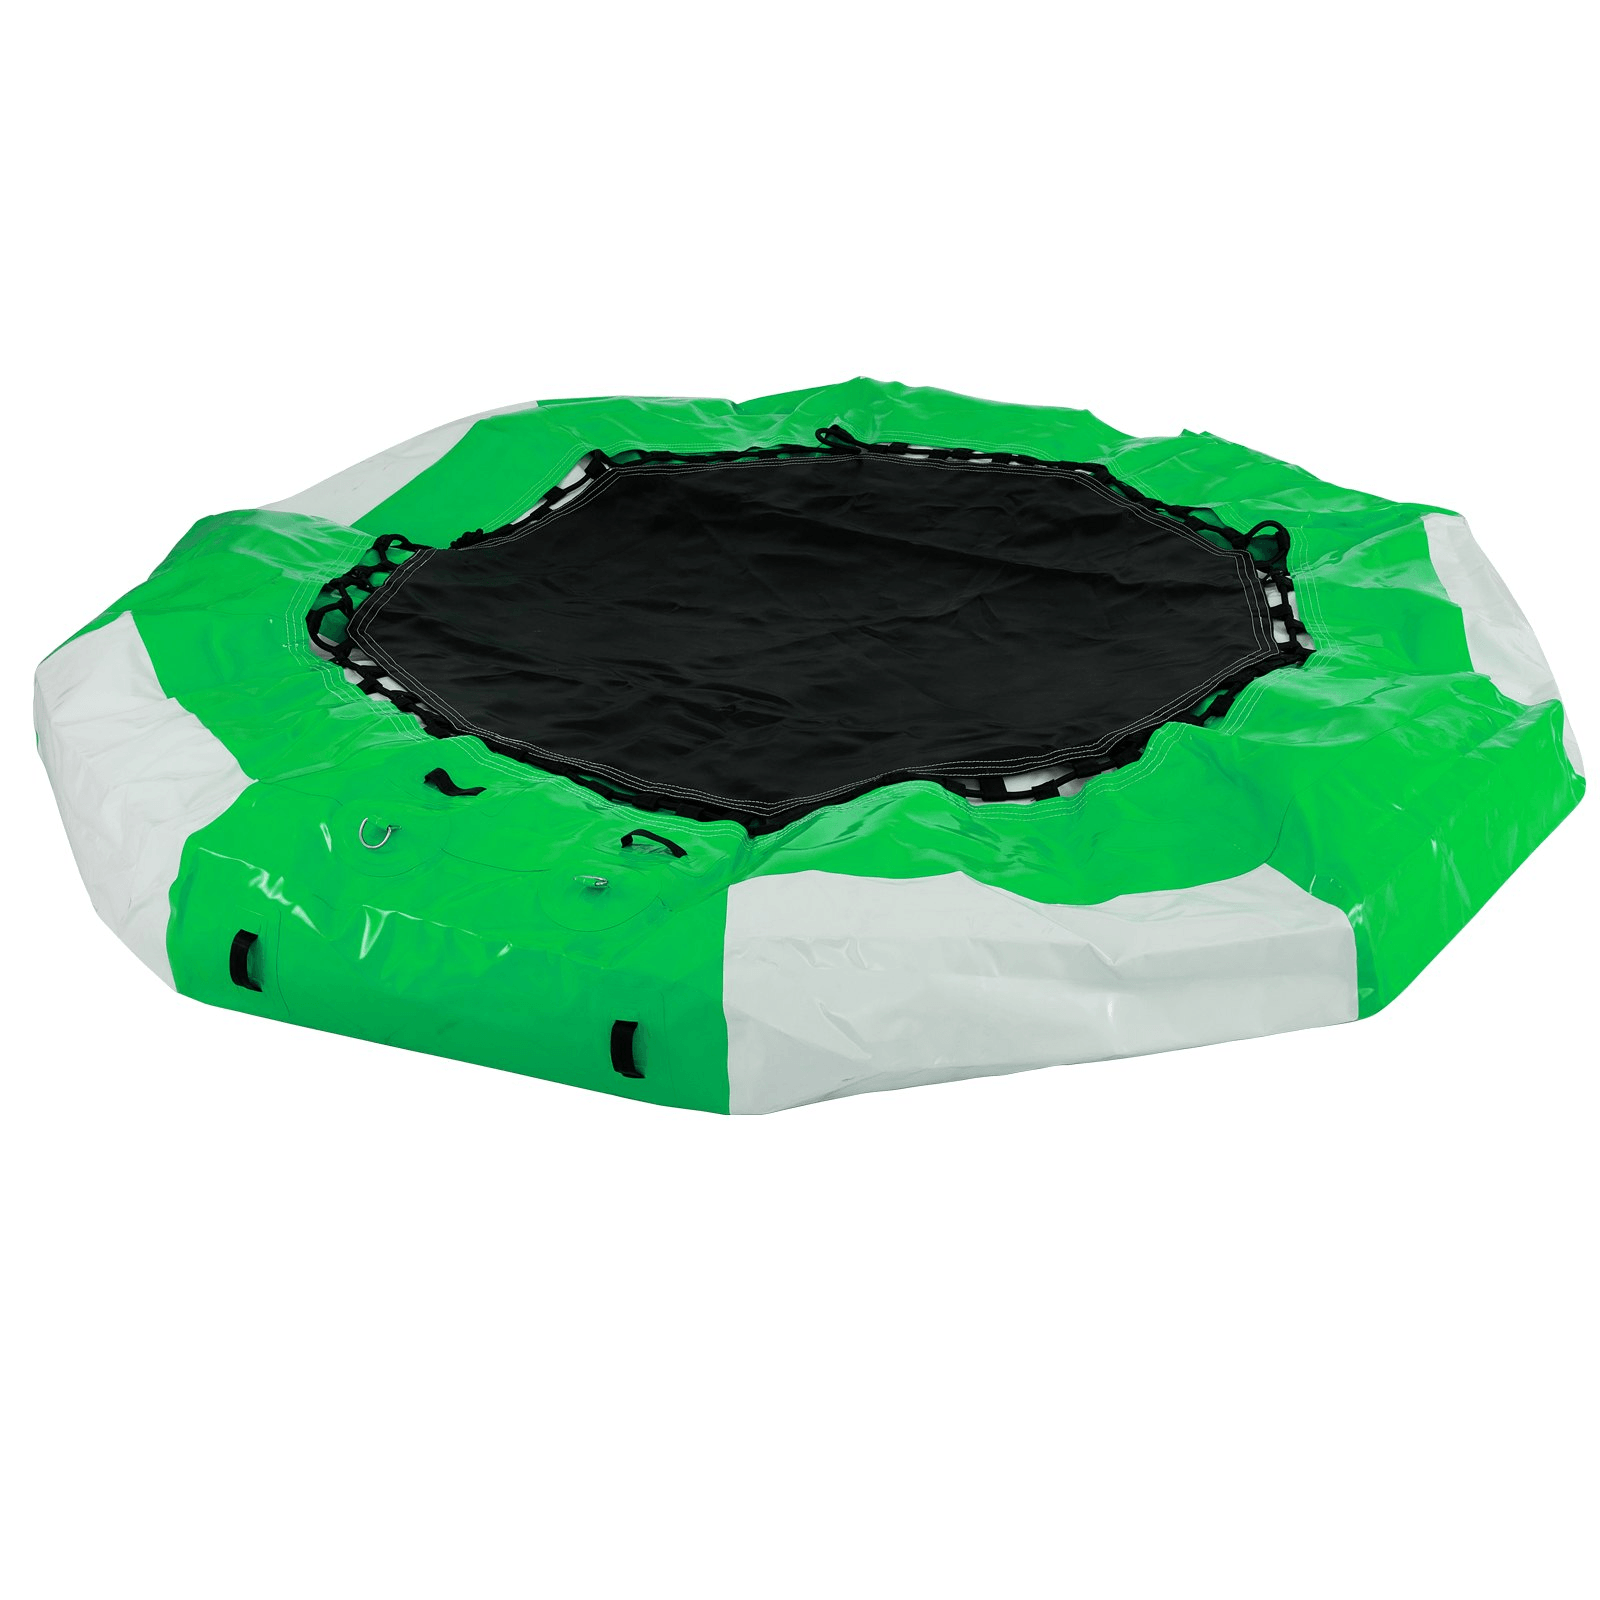 VEVOR Inflatable Water Trampoline 10FT , Round Inflatable Water Bouncer with 4-Step Ladder, Water Trampoline in Green and White for Water Sports. - Loomini